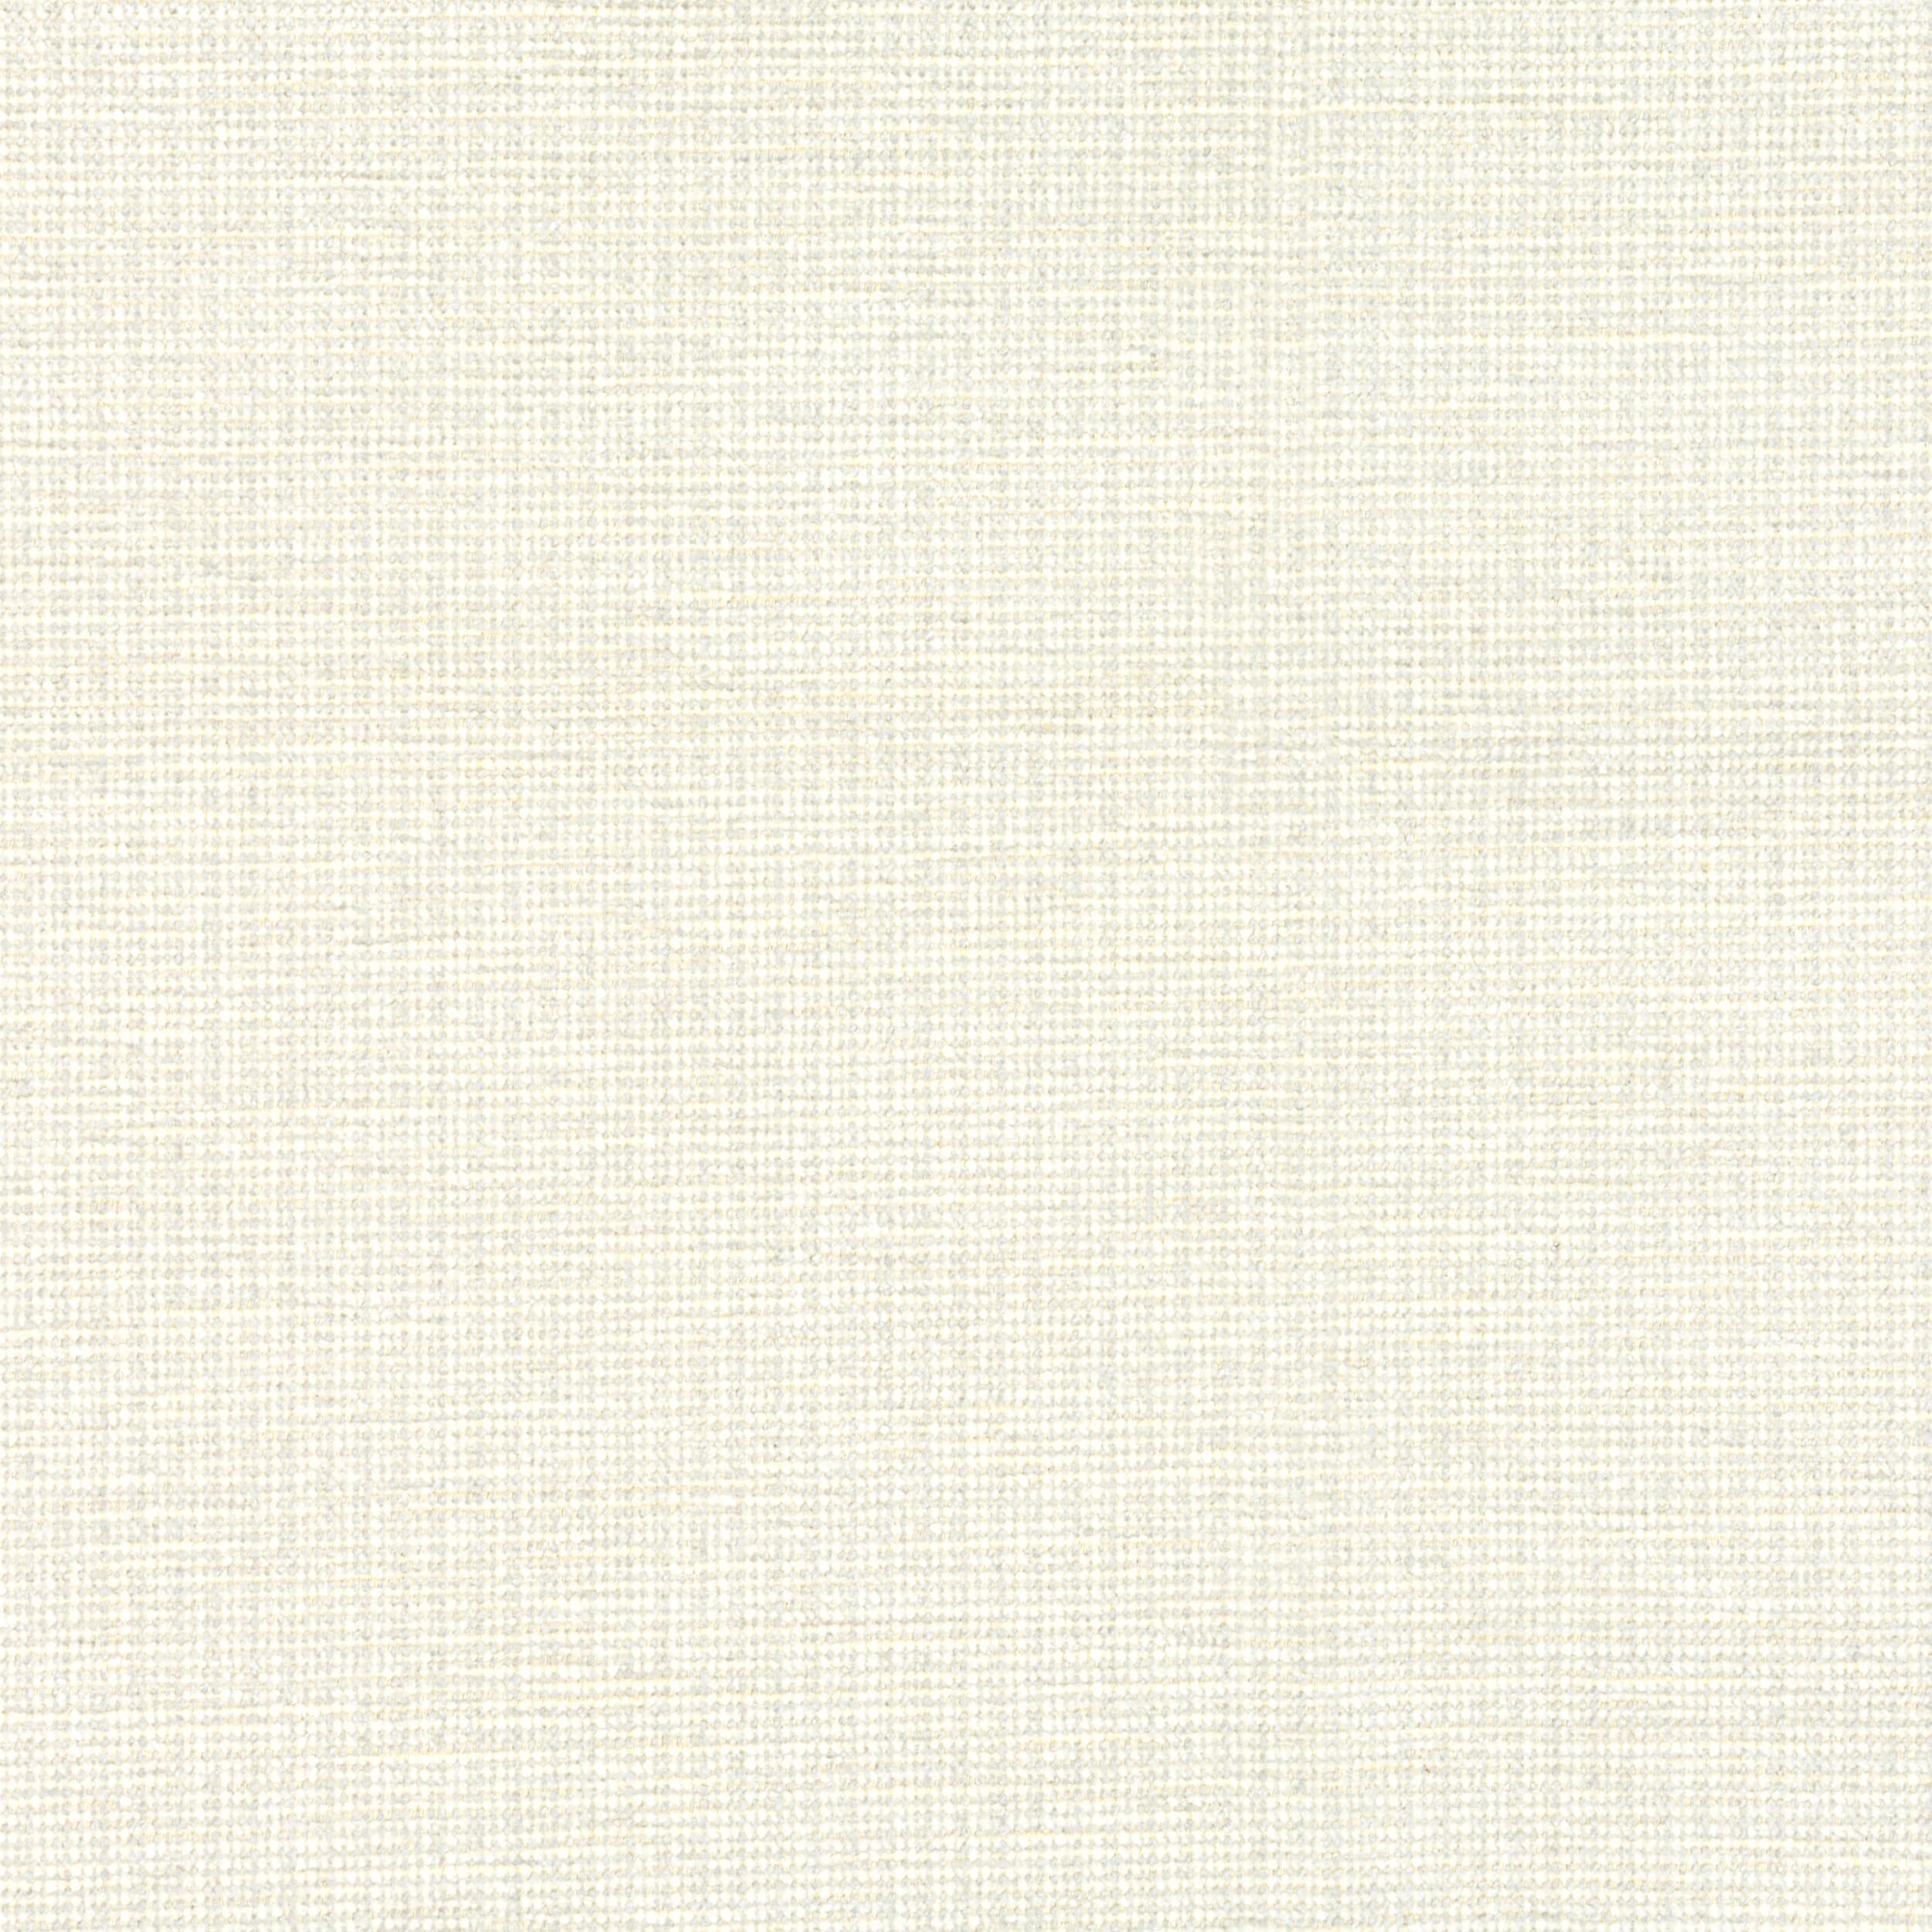 7804-17 Beginnings Fog by Stout Fabric